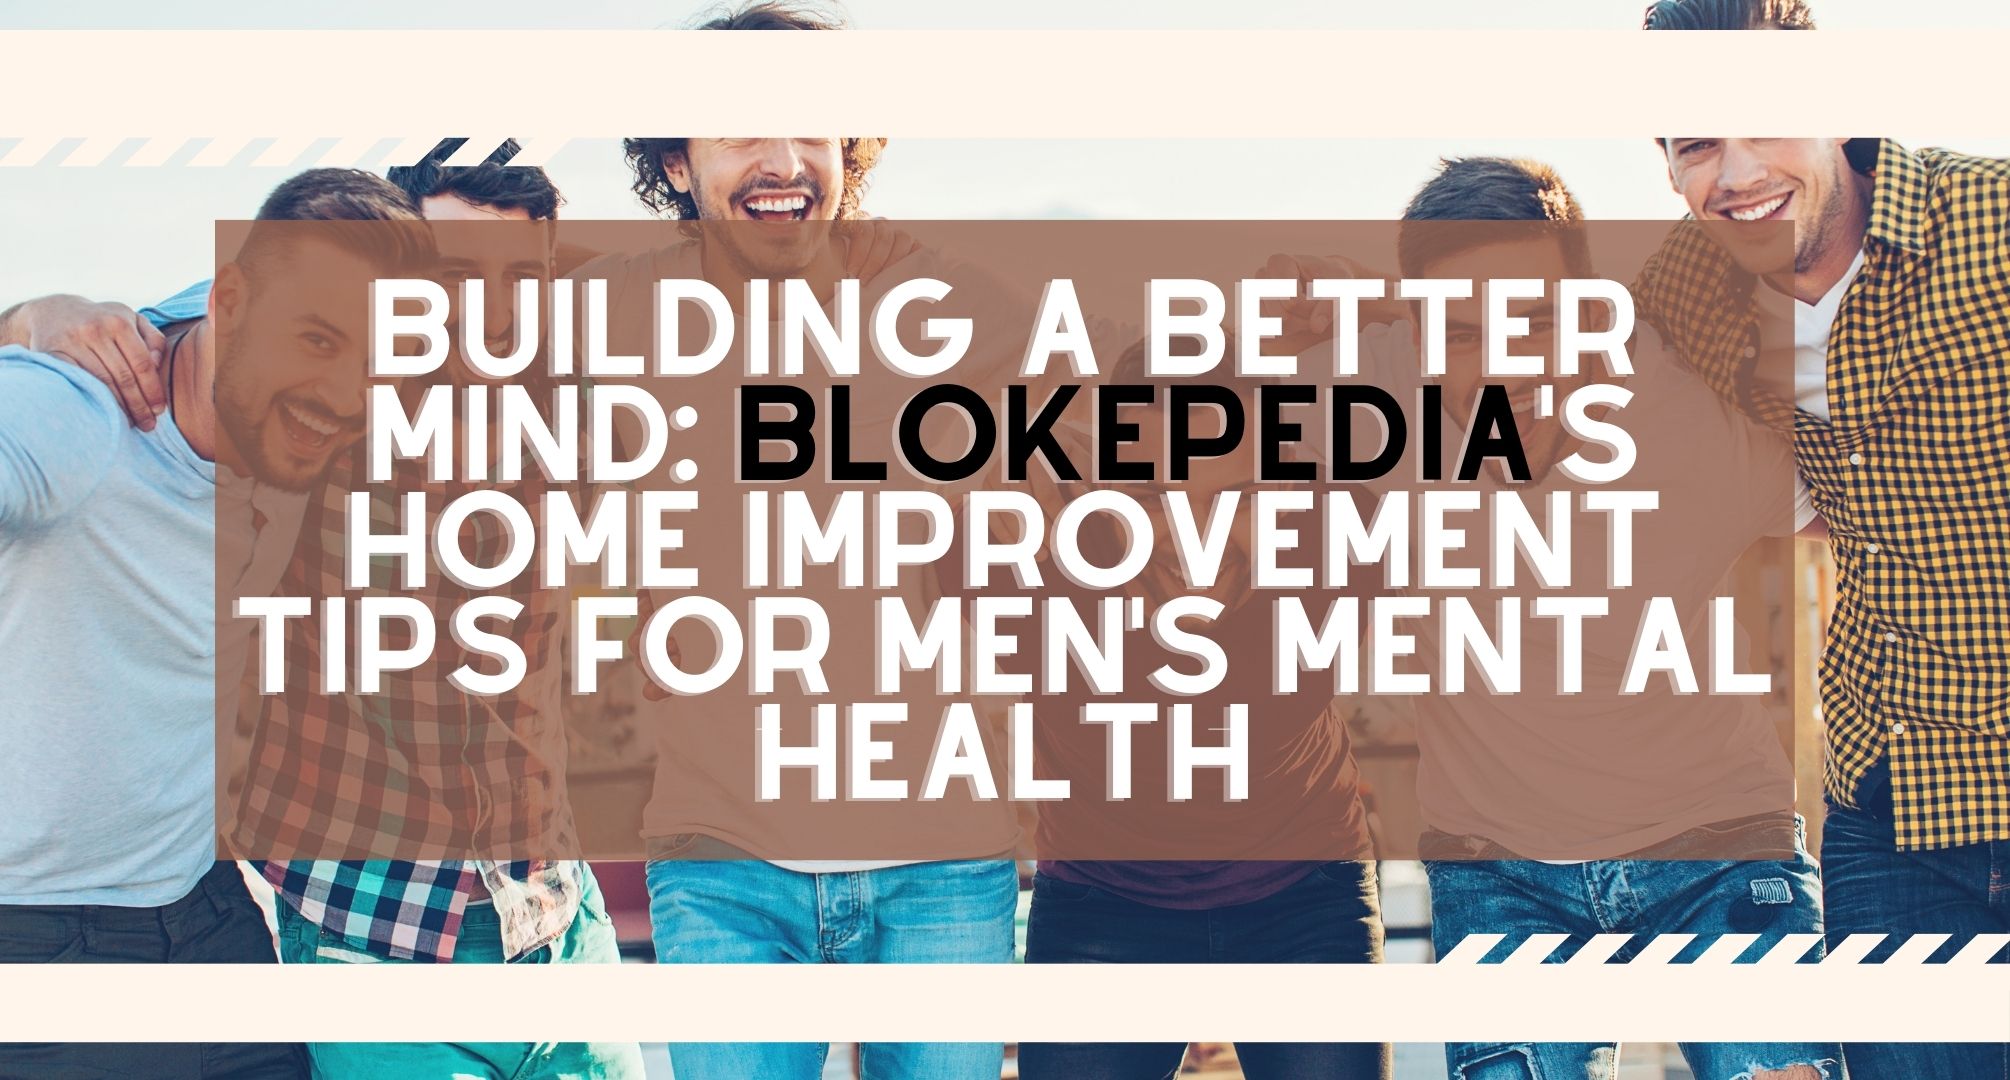 Building a Better Mind: Blokepedia's Home Improvement Tips for Men's Mental Health